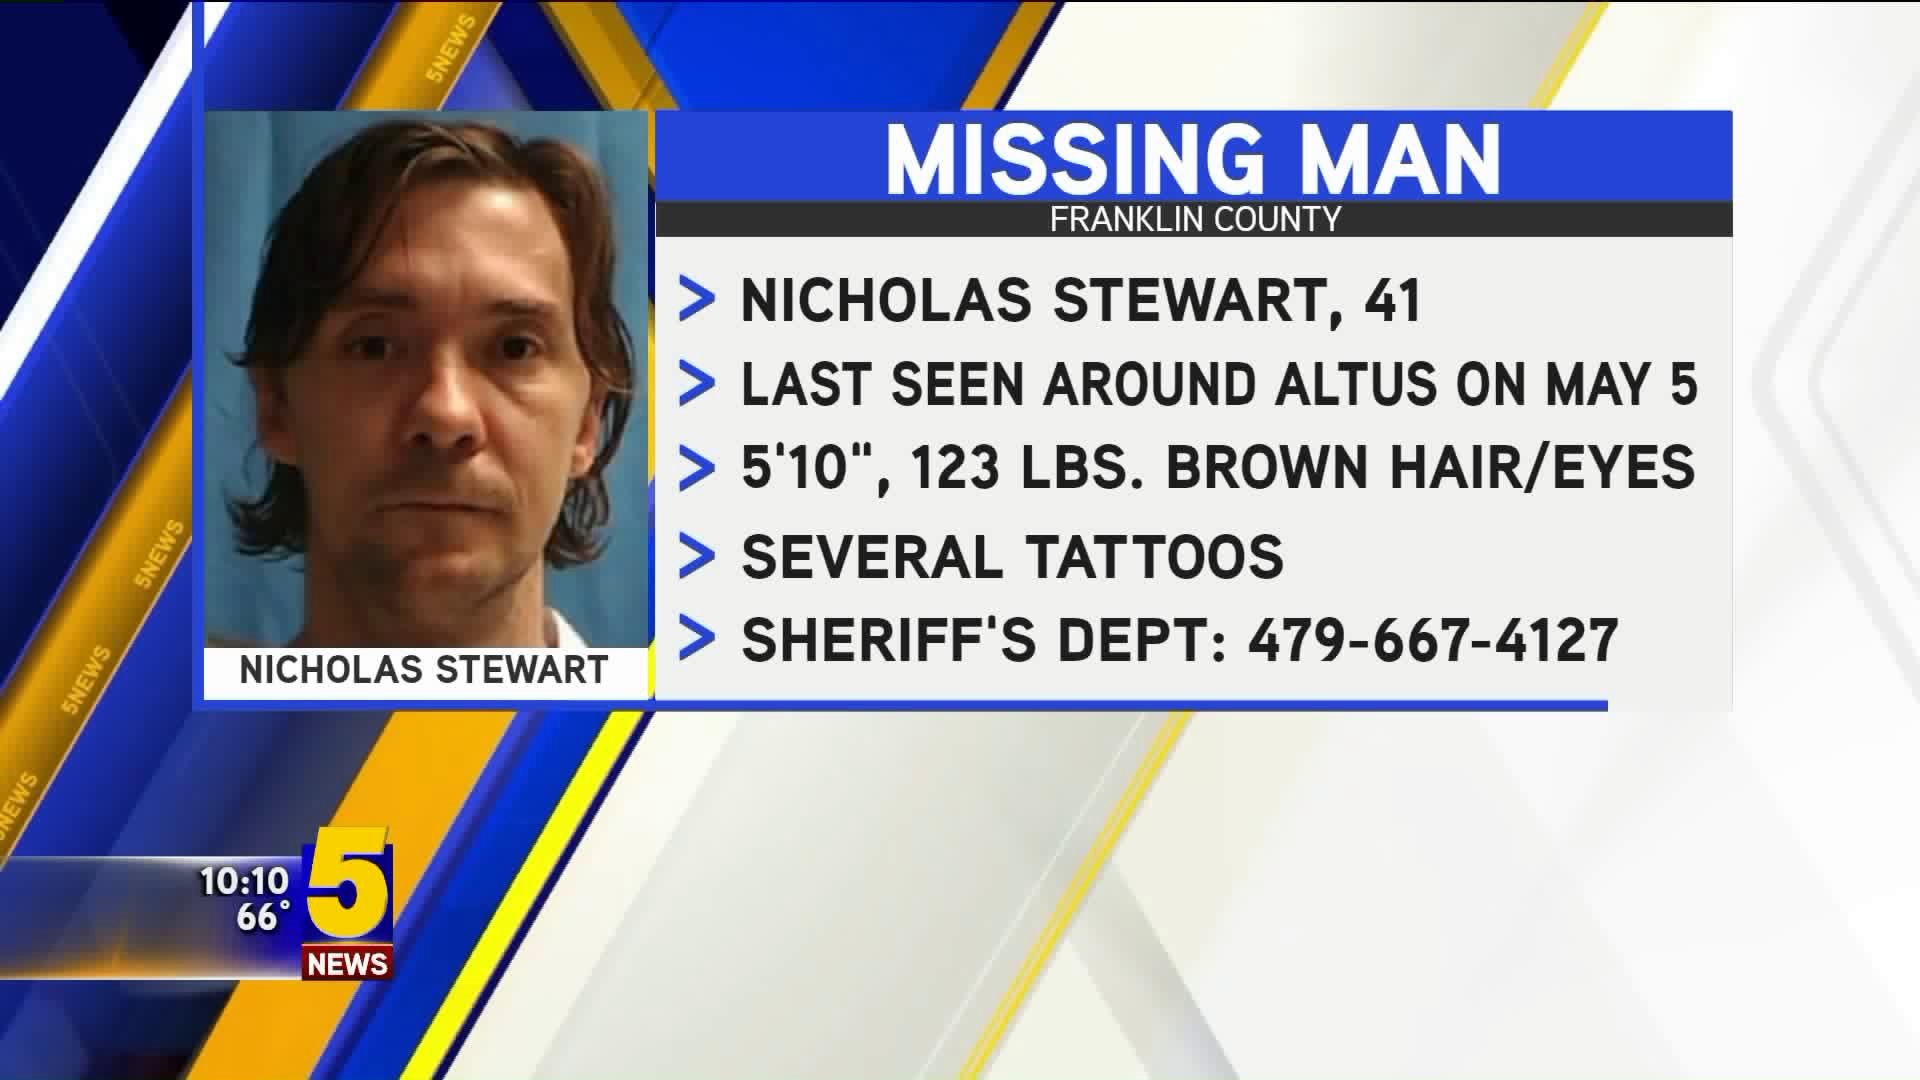 Franklin County Missing Man